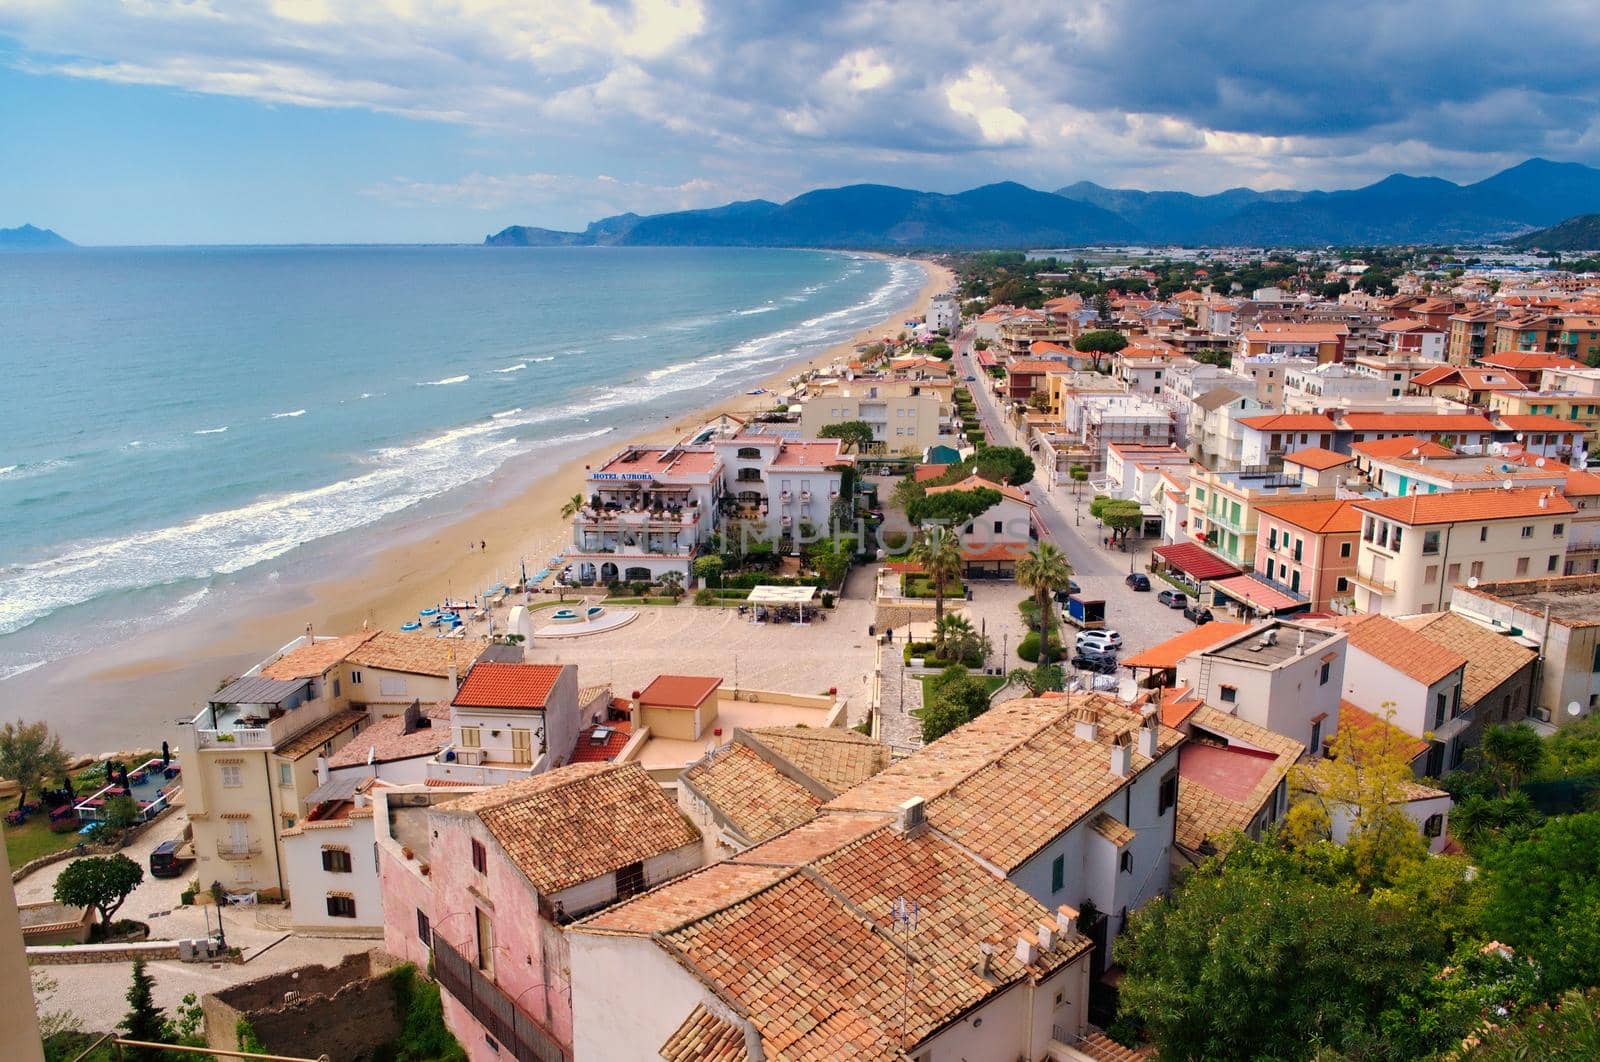 Town of Terracina, Italy. Elevated view of the beach. by hernan_hyper